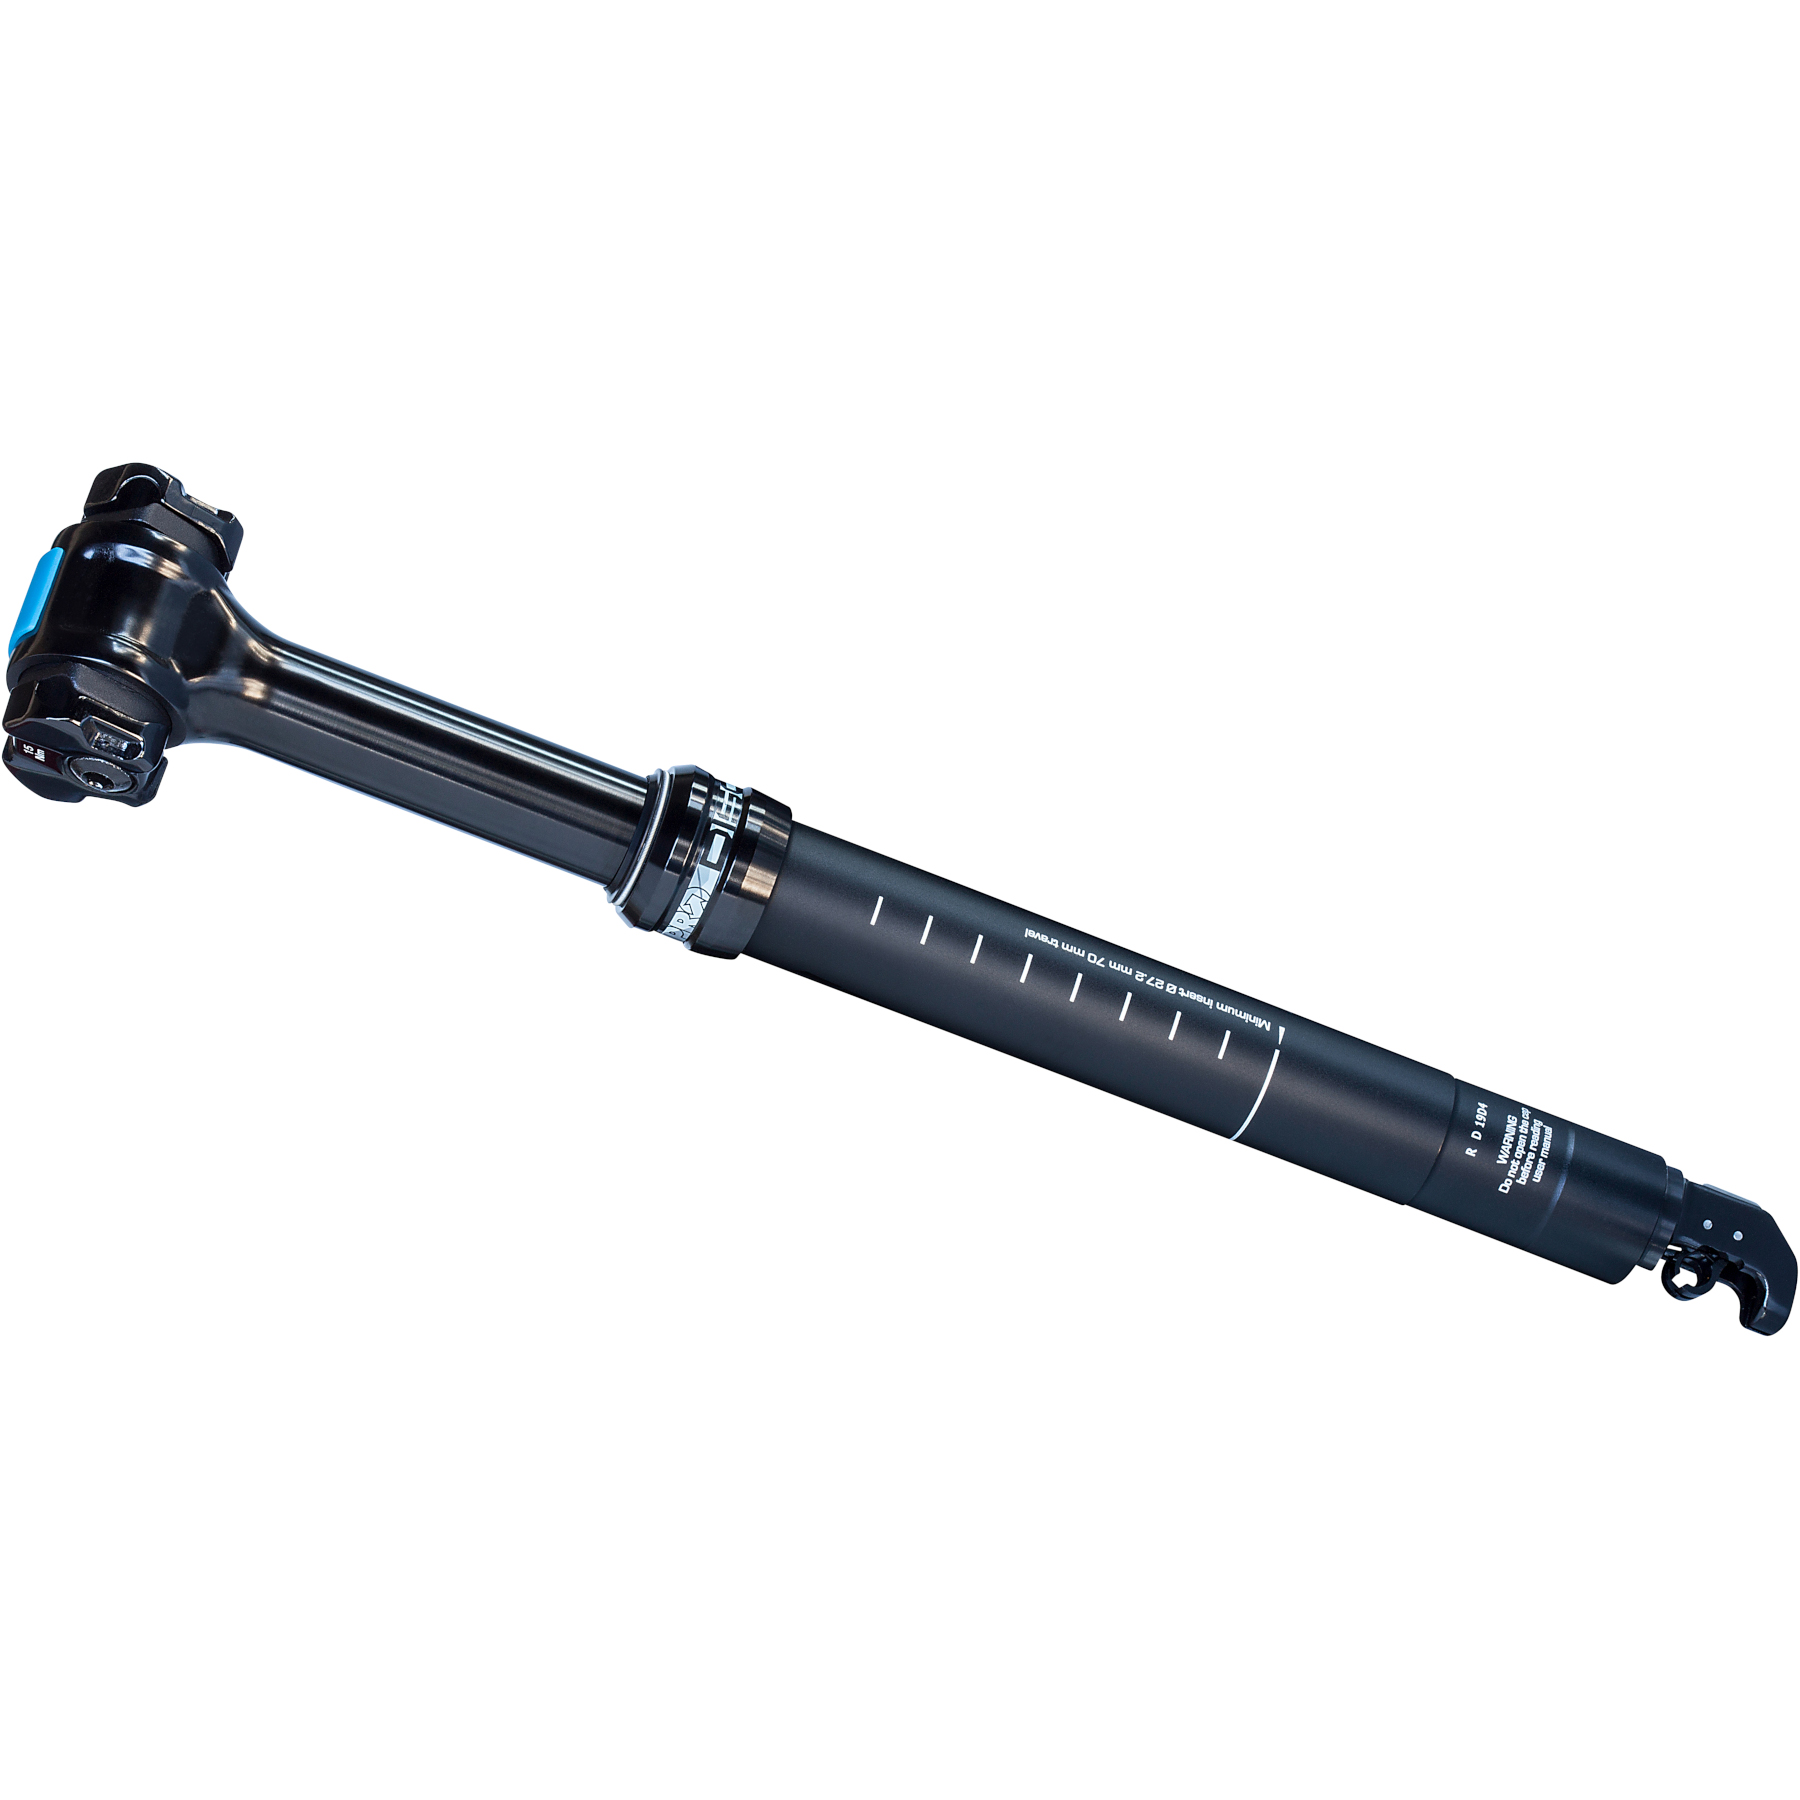 Productfoto van PRO Discover Dropper Post - 70mm Travel | Internal Routing - 27.2mm